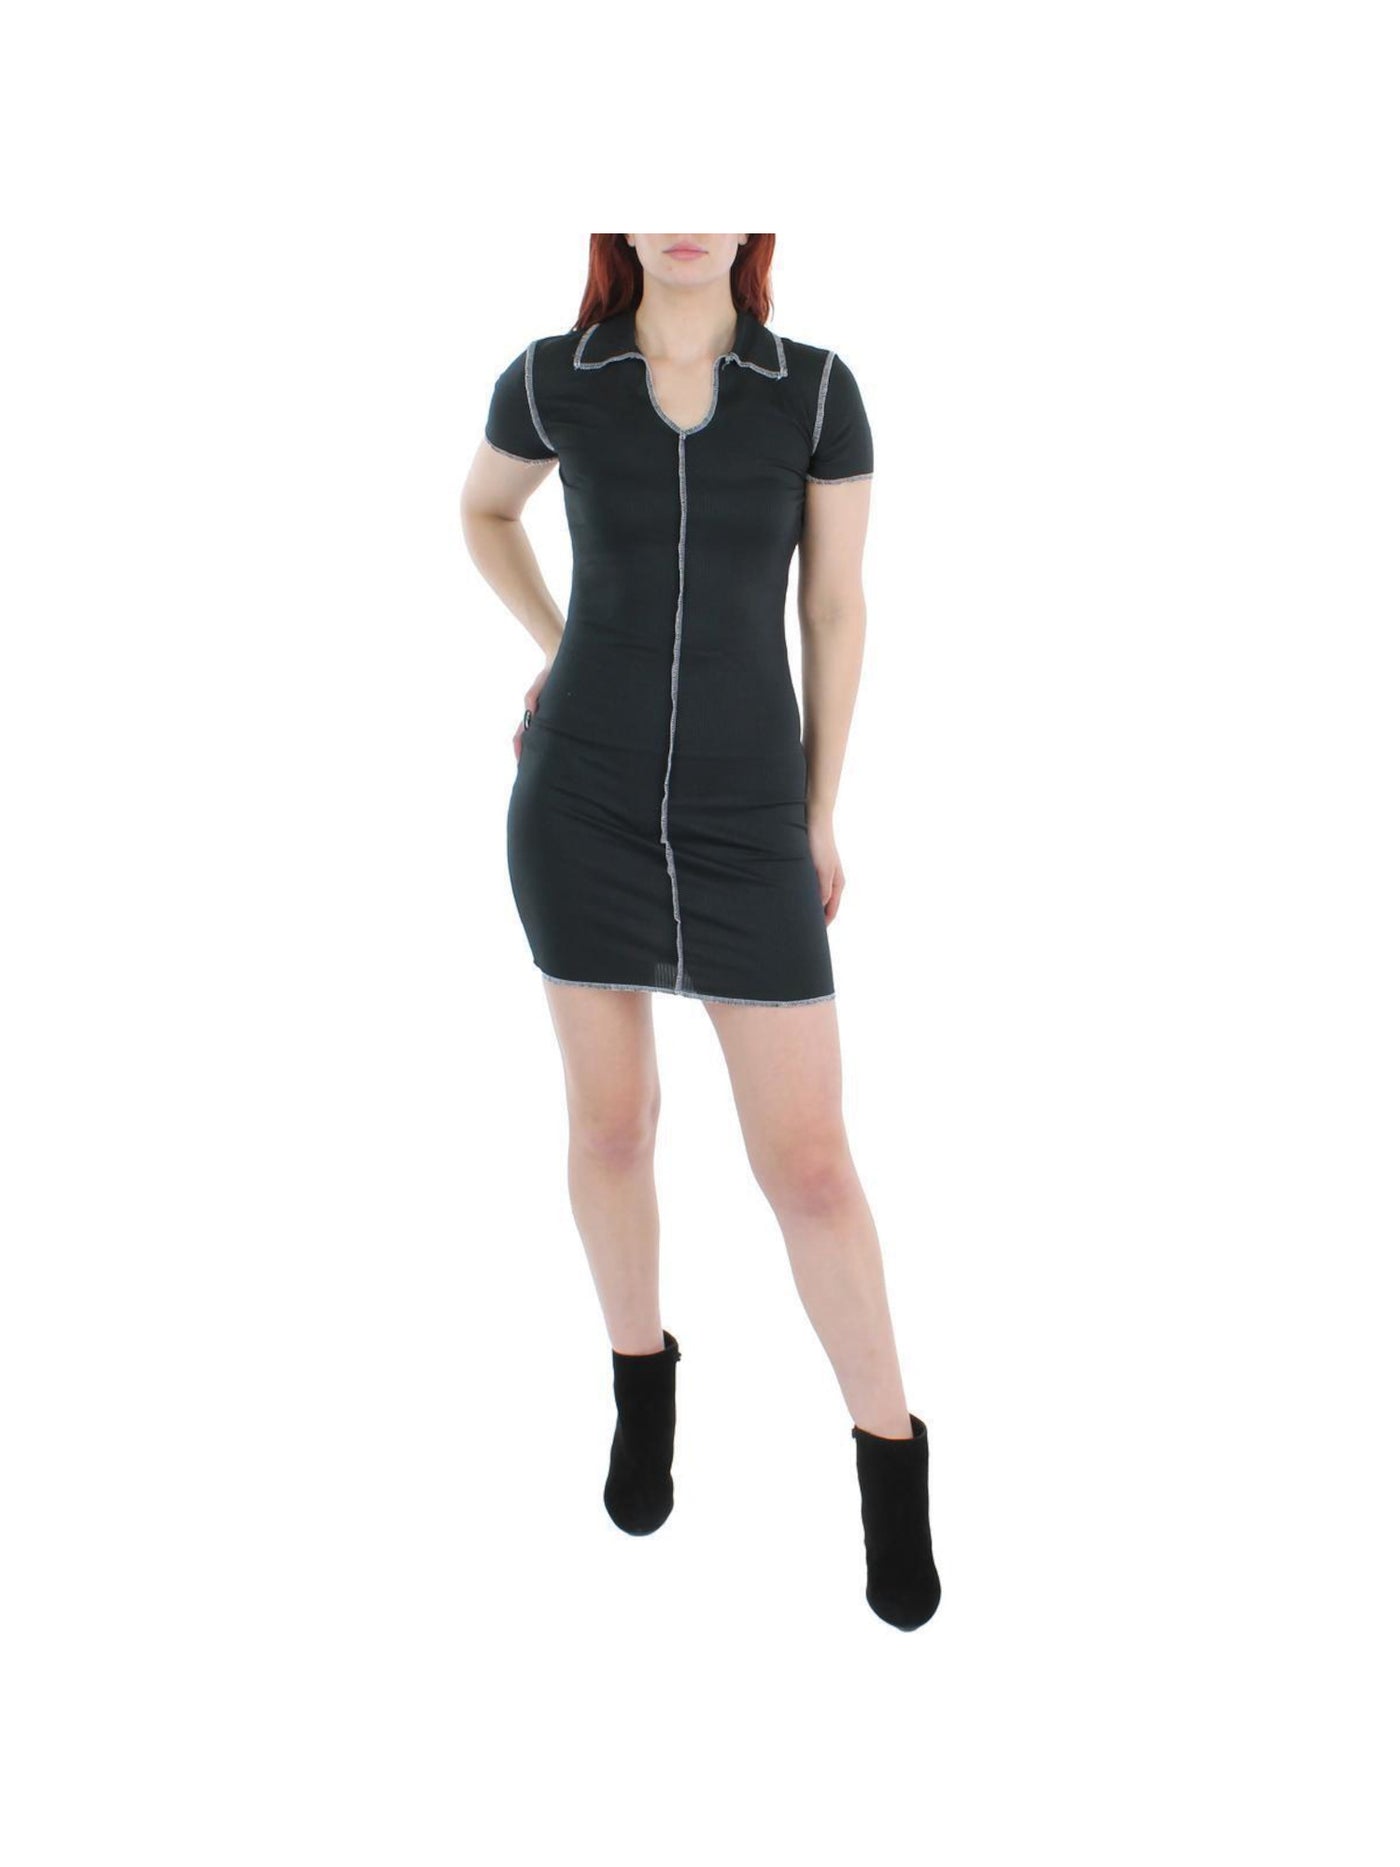 NO COMMENT Womens Black Fitted Ribbed Pullover Contrast Stitching Short Sleeve V Neck Short Shirt Dress M